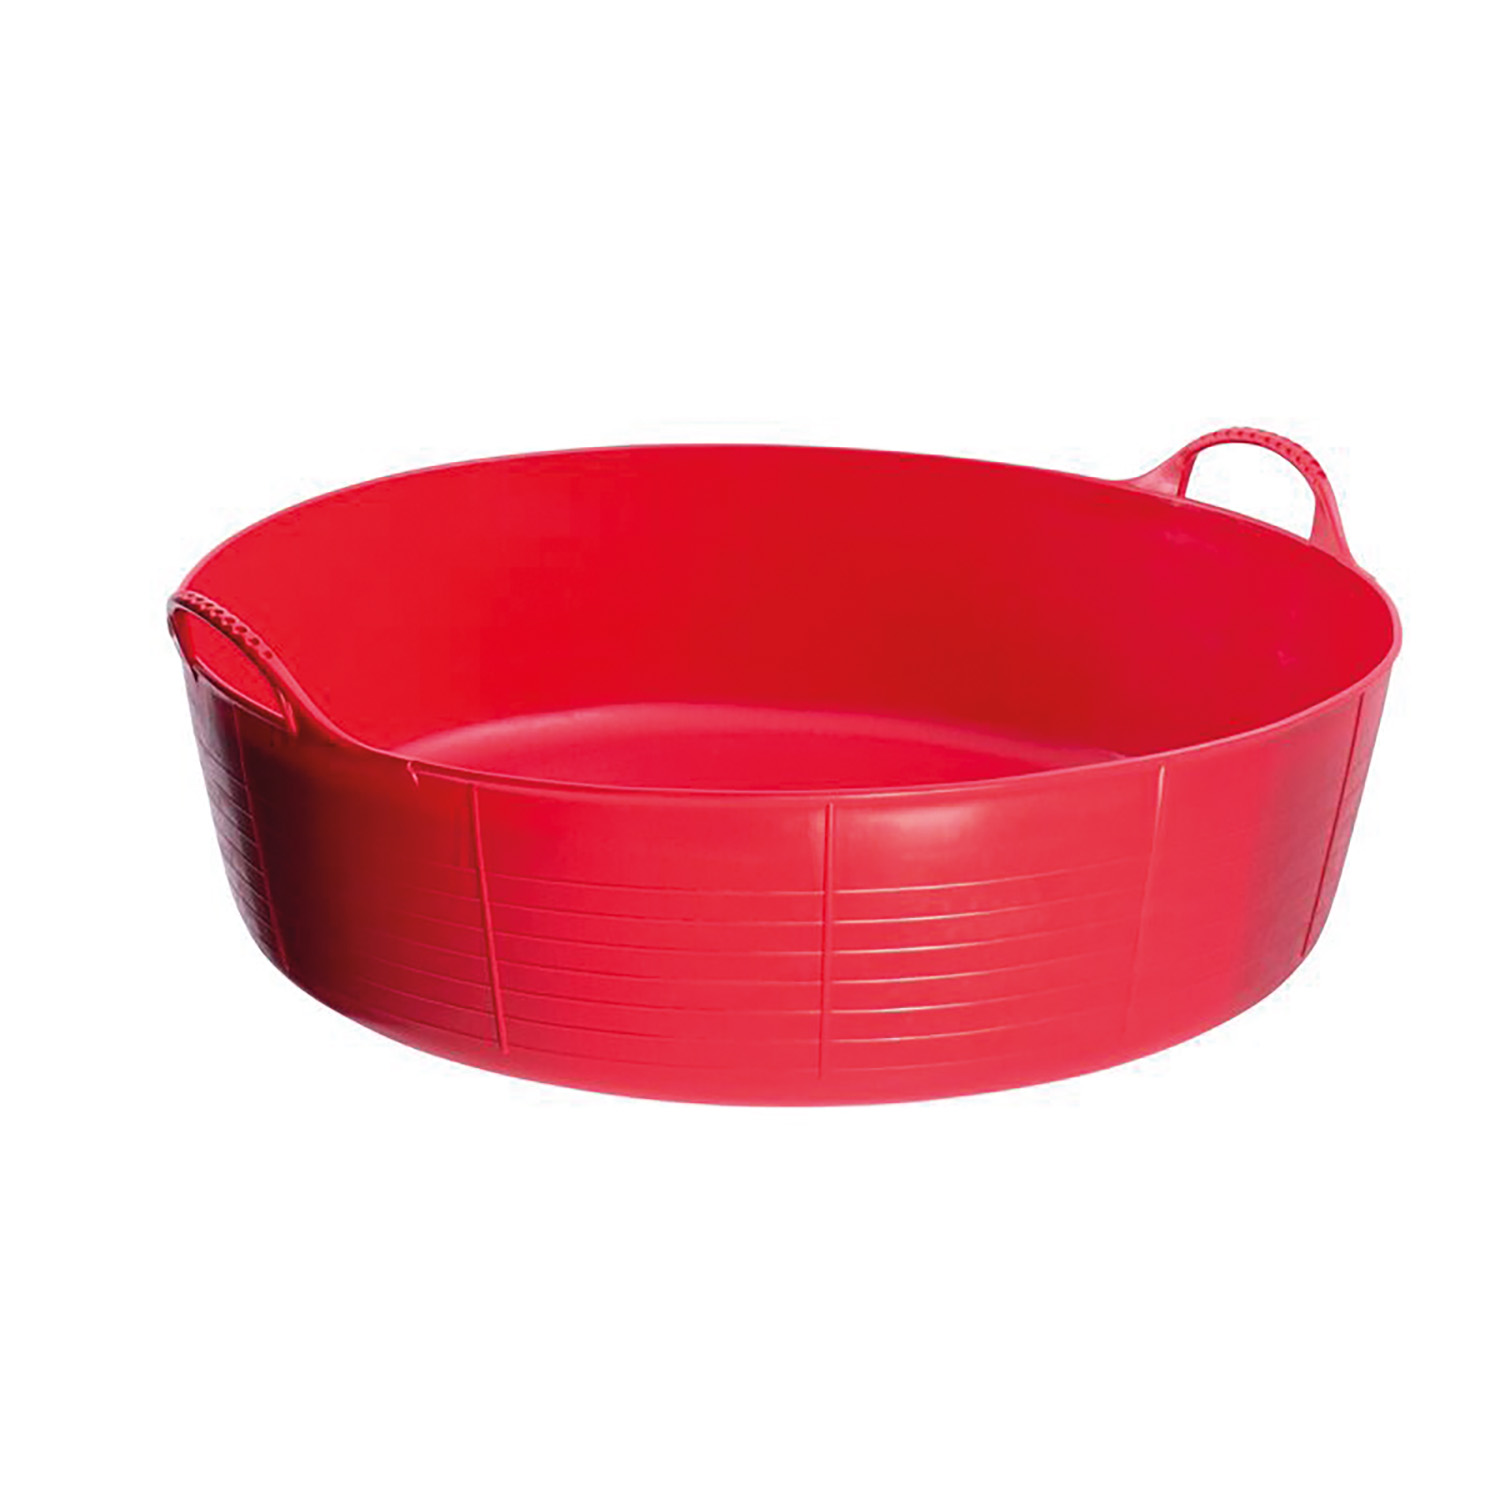 RED GORILLA TUBTRUG FLEXIBLE LARGE SHALLOW  RED LARGE SHALLOW